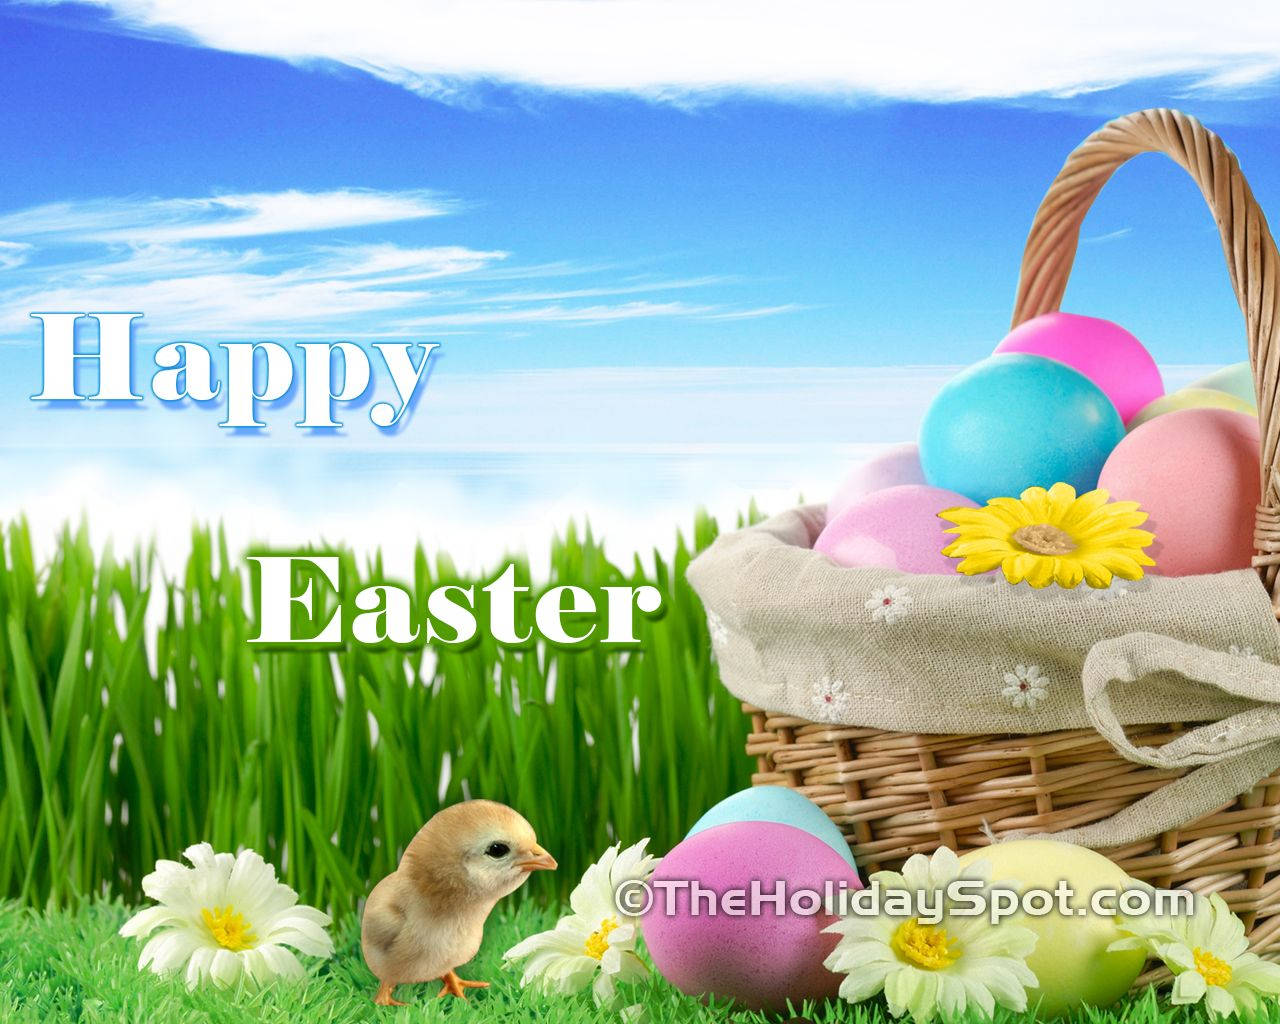 Happy Easter Greetings With Eggs And Chick Background